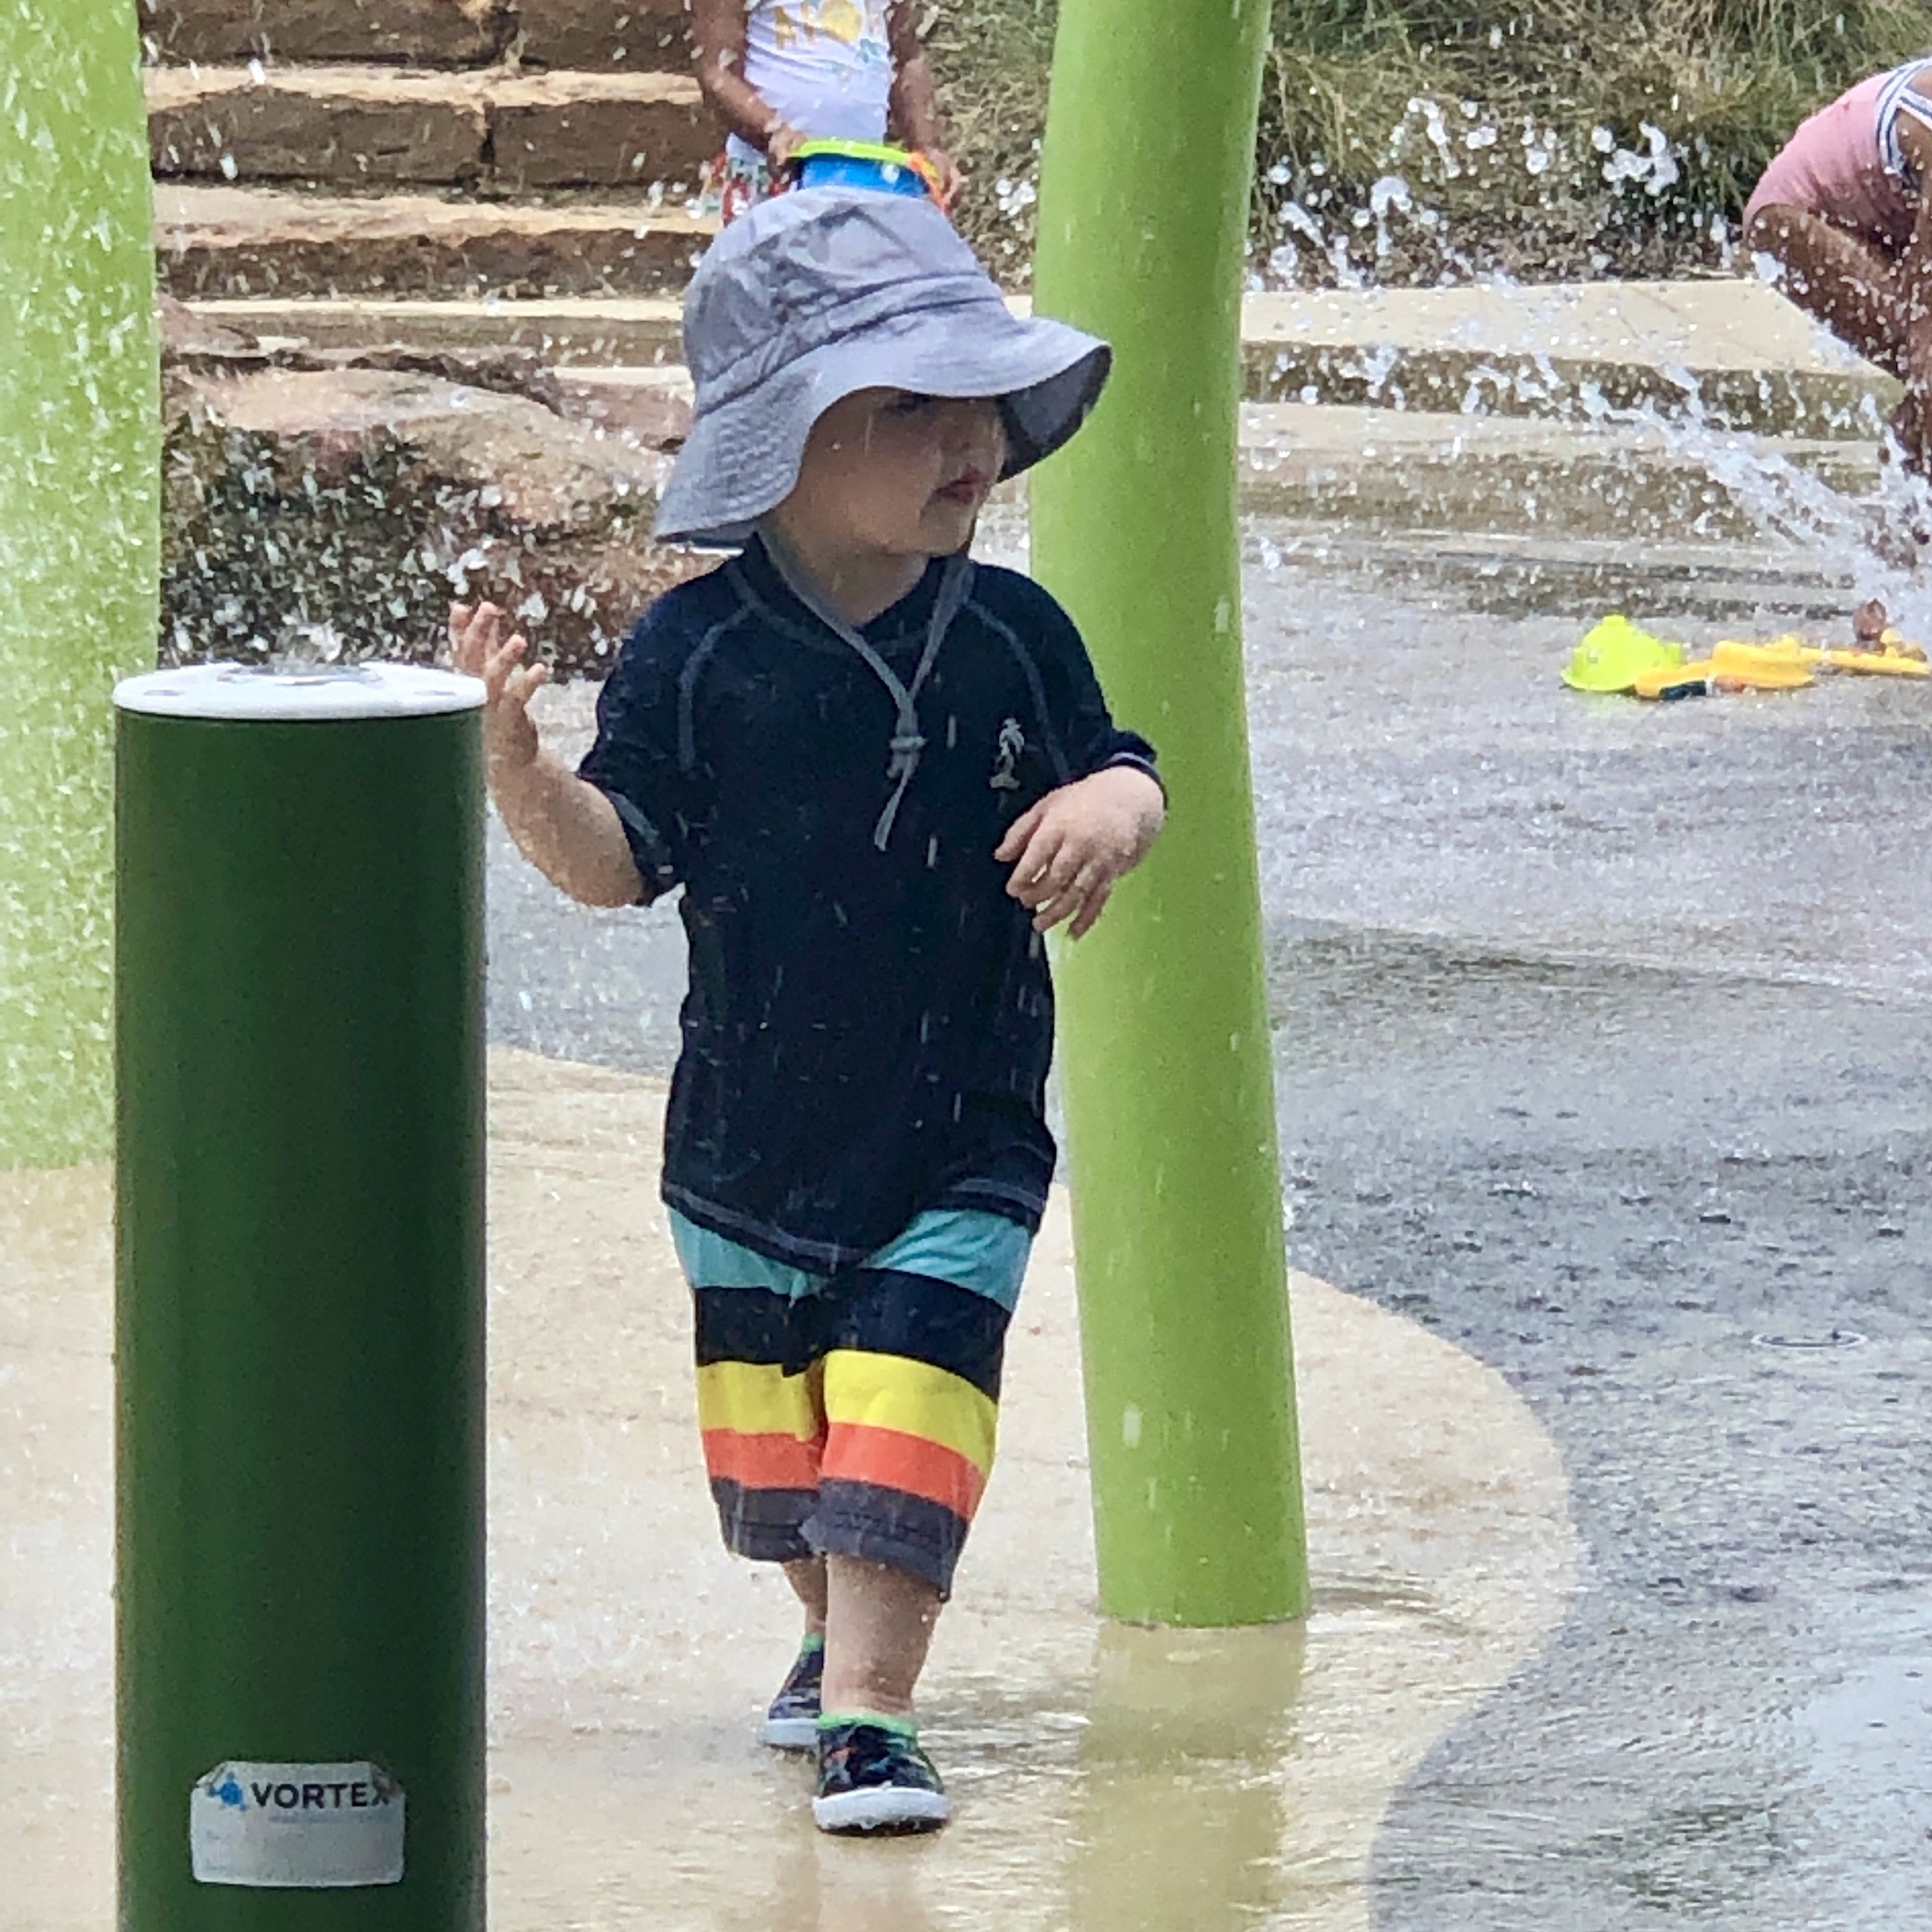 The Best Splash Pad in the Fort Worth Area